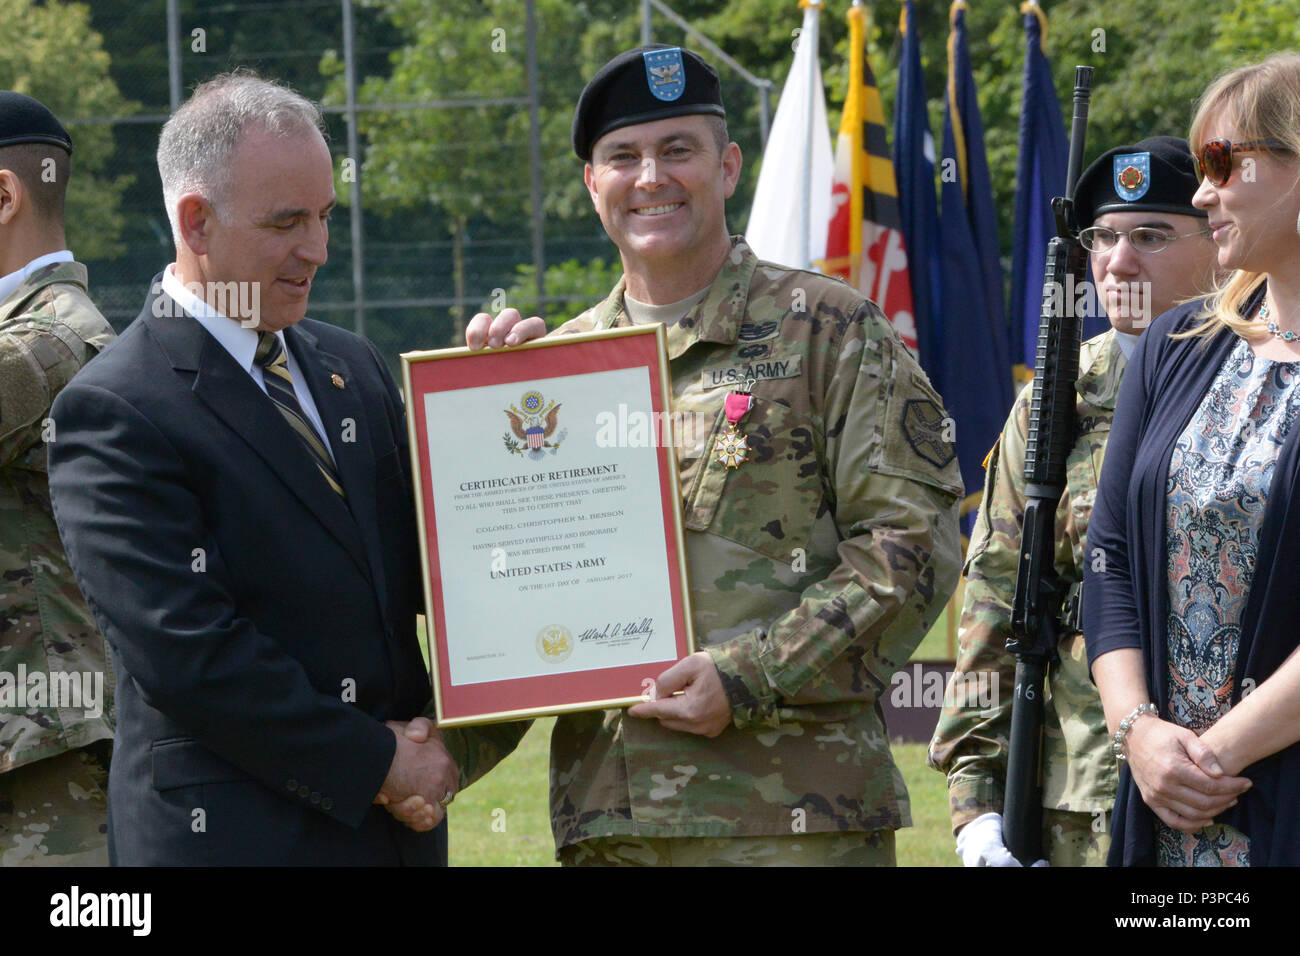 ANSBACH, Germany (July 21, 2016) – Michael D. Formica, director of Installation Management Command – Europe, thanks Col. Christopher M. Benson, outgoing commander of U.S. Army Garrison Ansbach, for Benson’s service and performance. Benson’s retirement ceremony followed the USAG Ansbach change of command Monday at Barton Barracks here.. Stock Photo